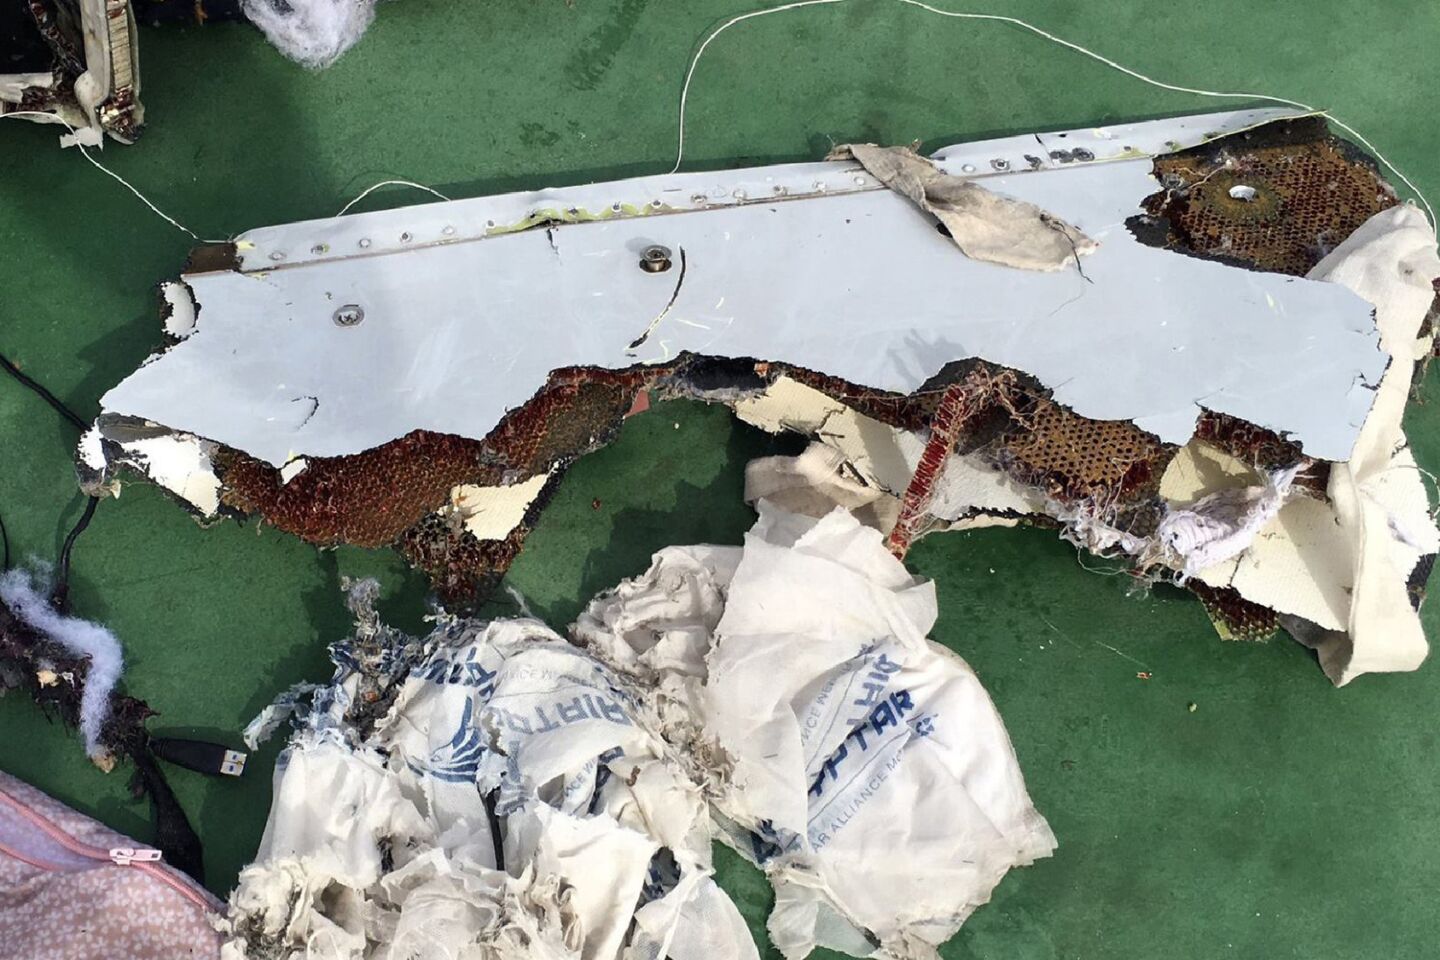 A photo on the official Facebook page of the Egyptian military spokesperson reportedly shows EgyptAir crash debris.